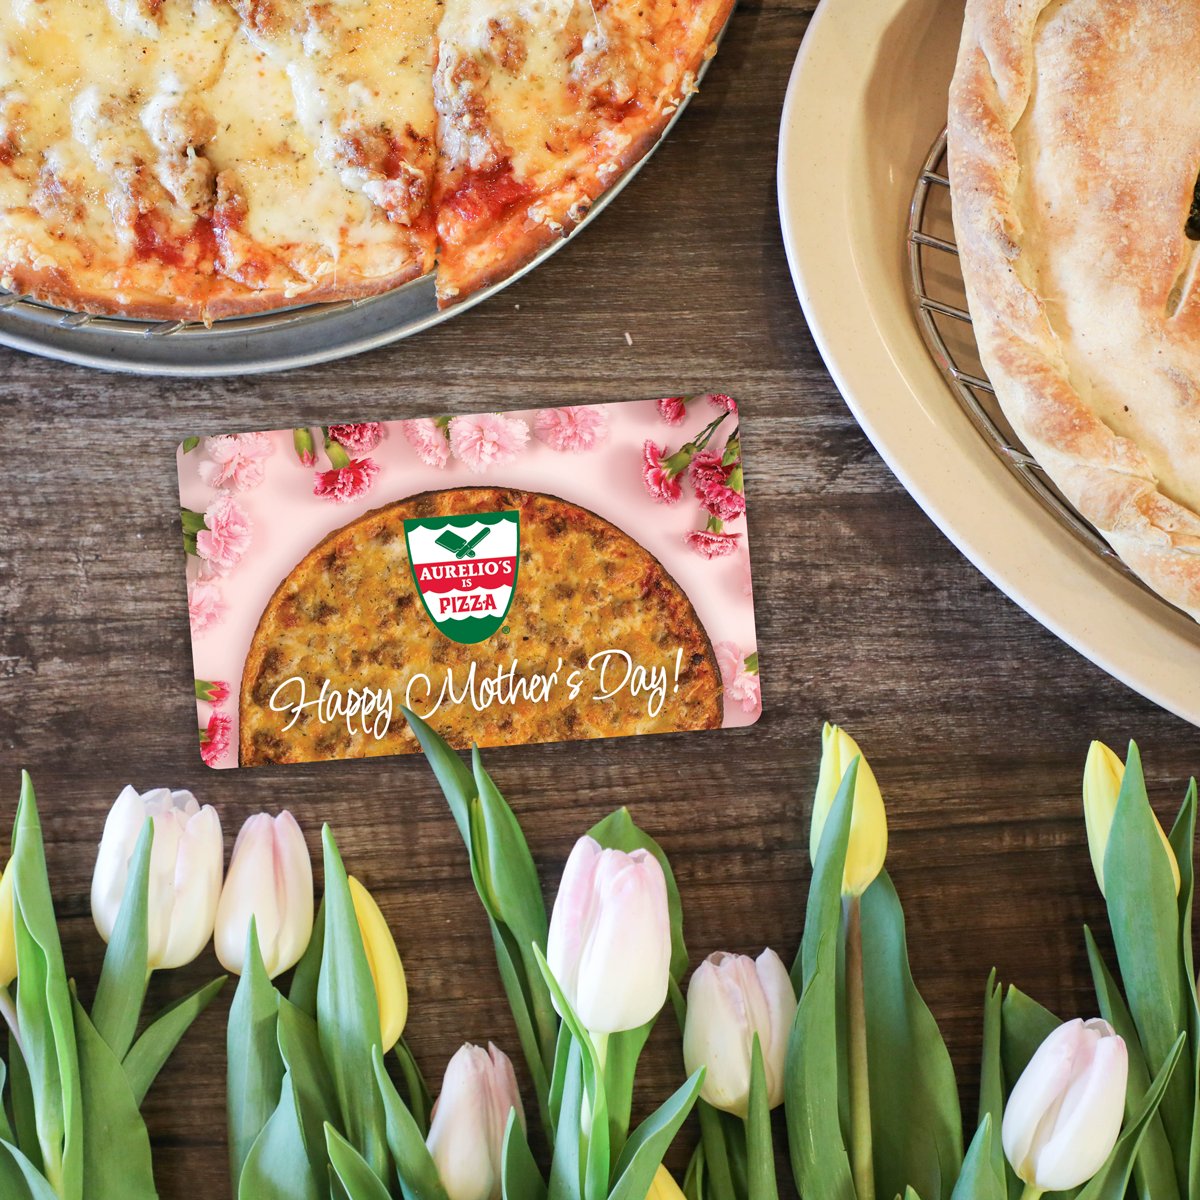 Mother’s Day is May 12th and we want to make it easier for you to gift something special for the moms in your life. When you buy $50 worth of Aurelio’s eGift Cards, you’ll receive a $10 Treat Yourself eCard! Click the link to buy now! rpb.li/3ainO